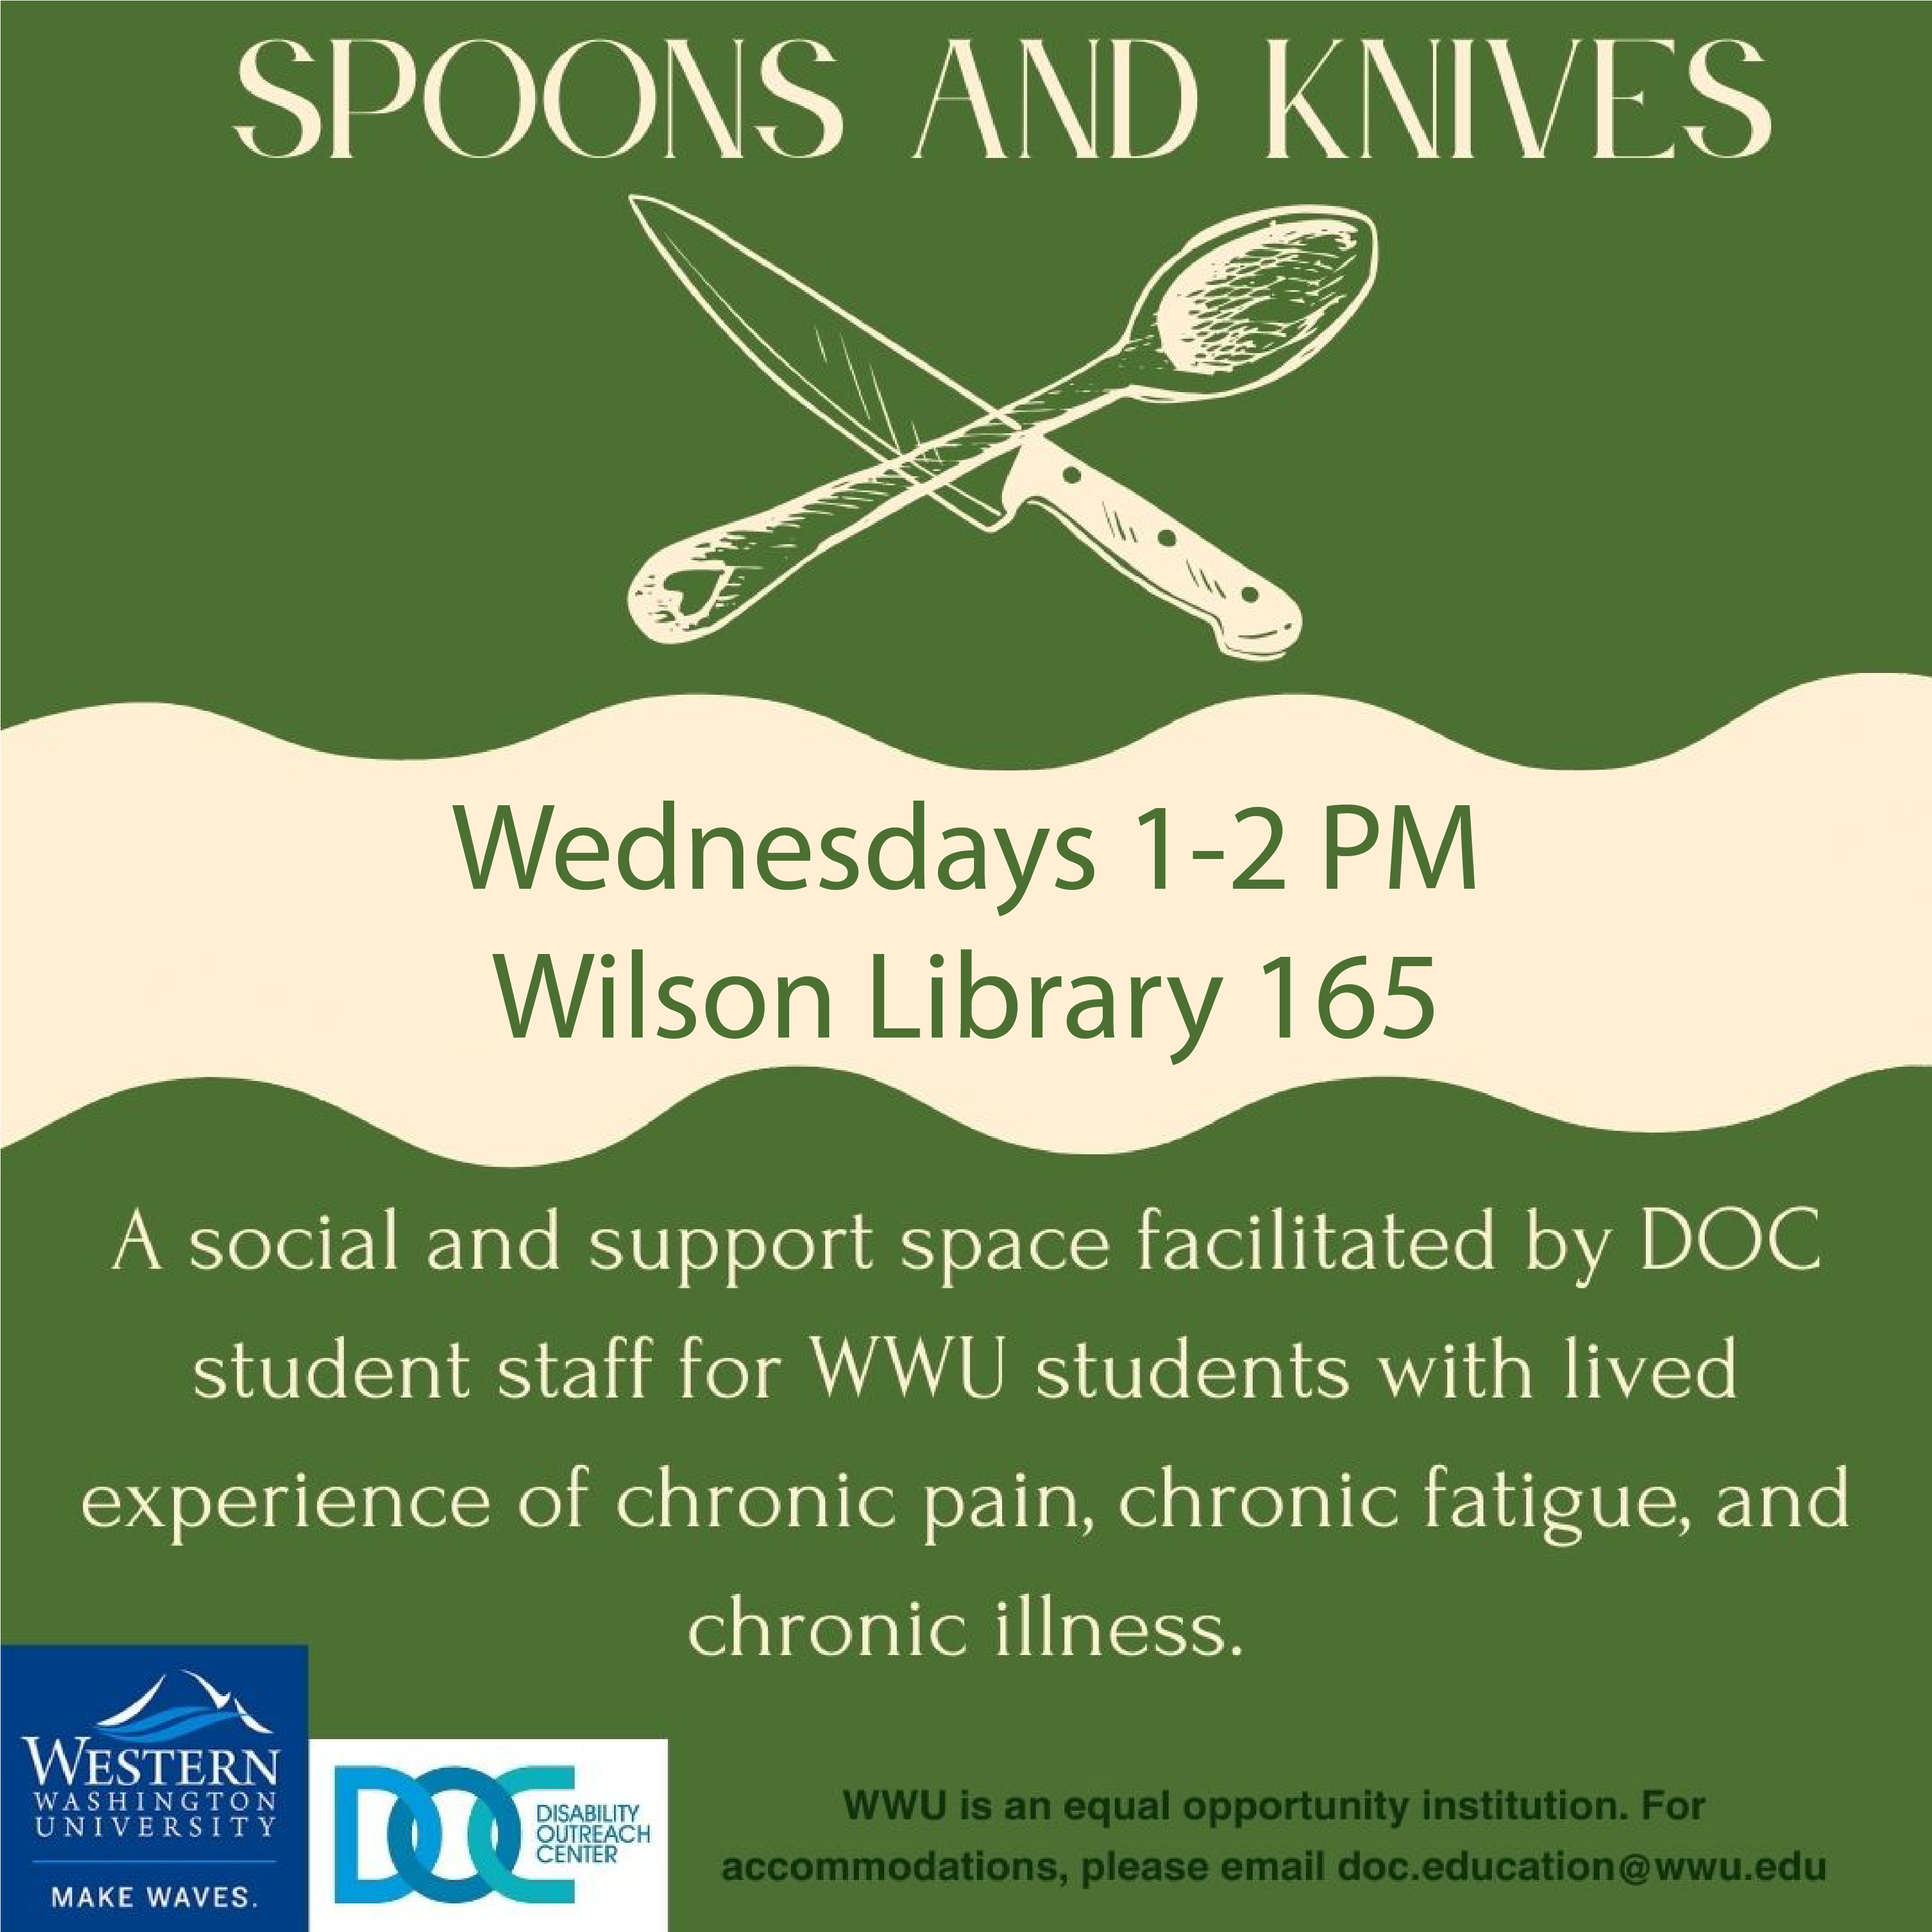 A graphic advertising Spoons and Knives, a support space for students with chronic pain, illness, and fatigue